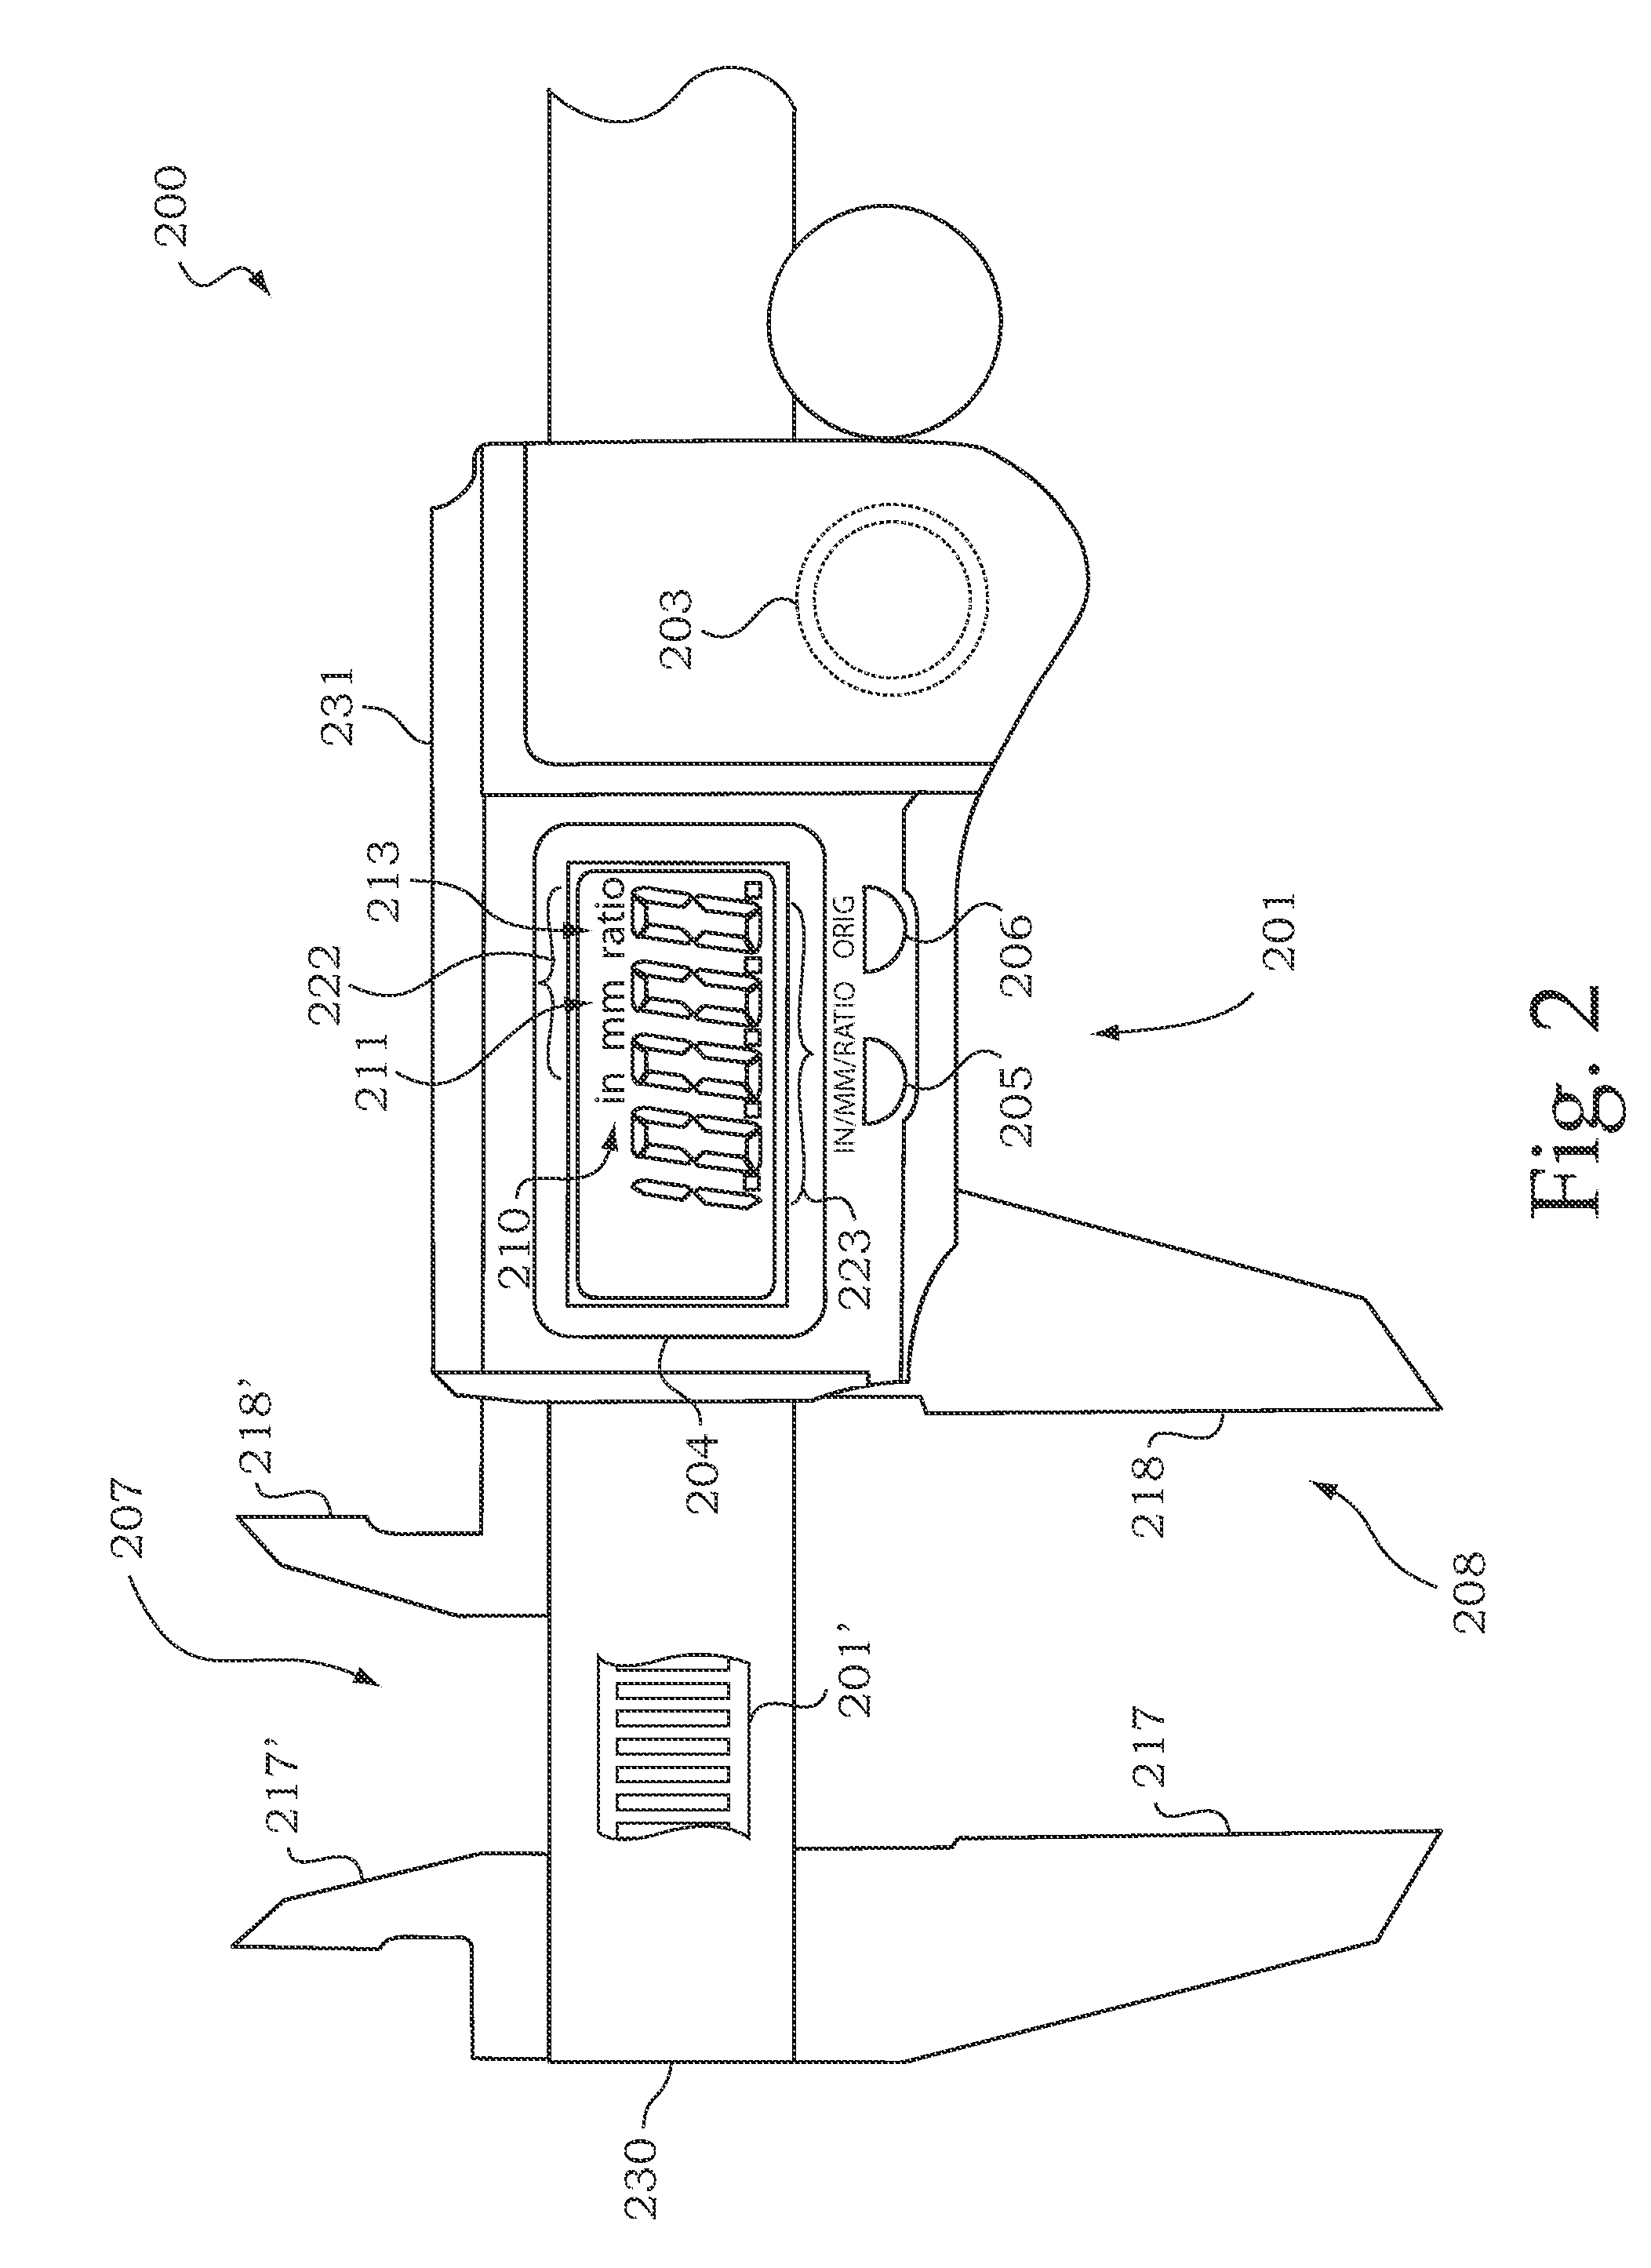 Display configuration for multimode electronic calipers having a ratiometric measurement mode